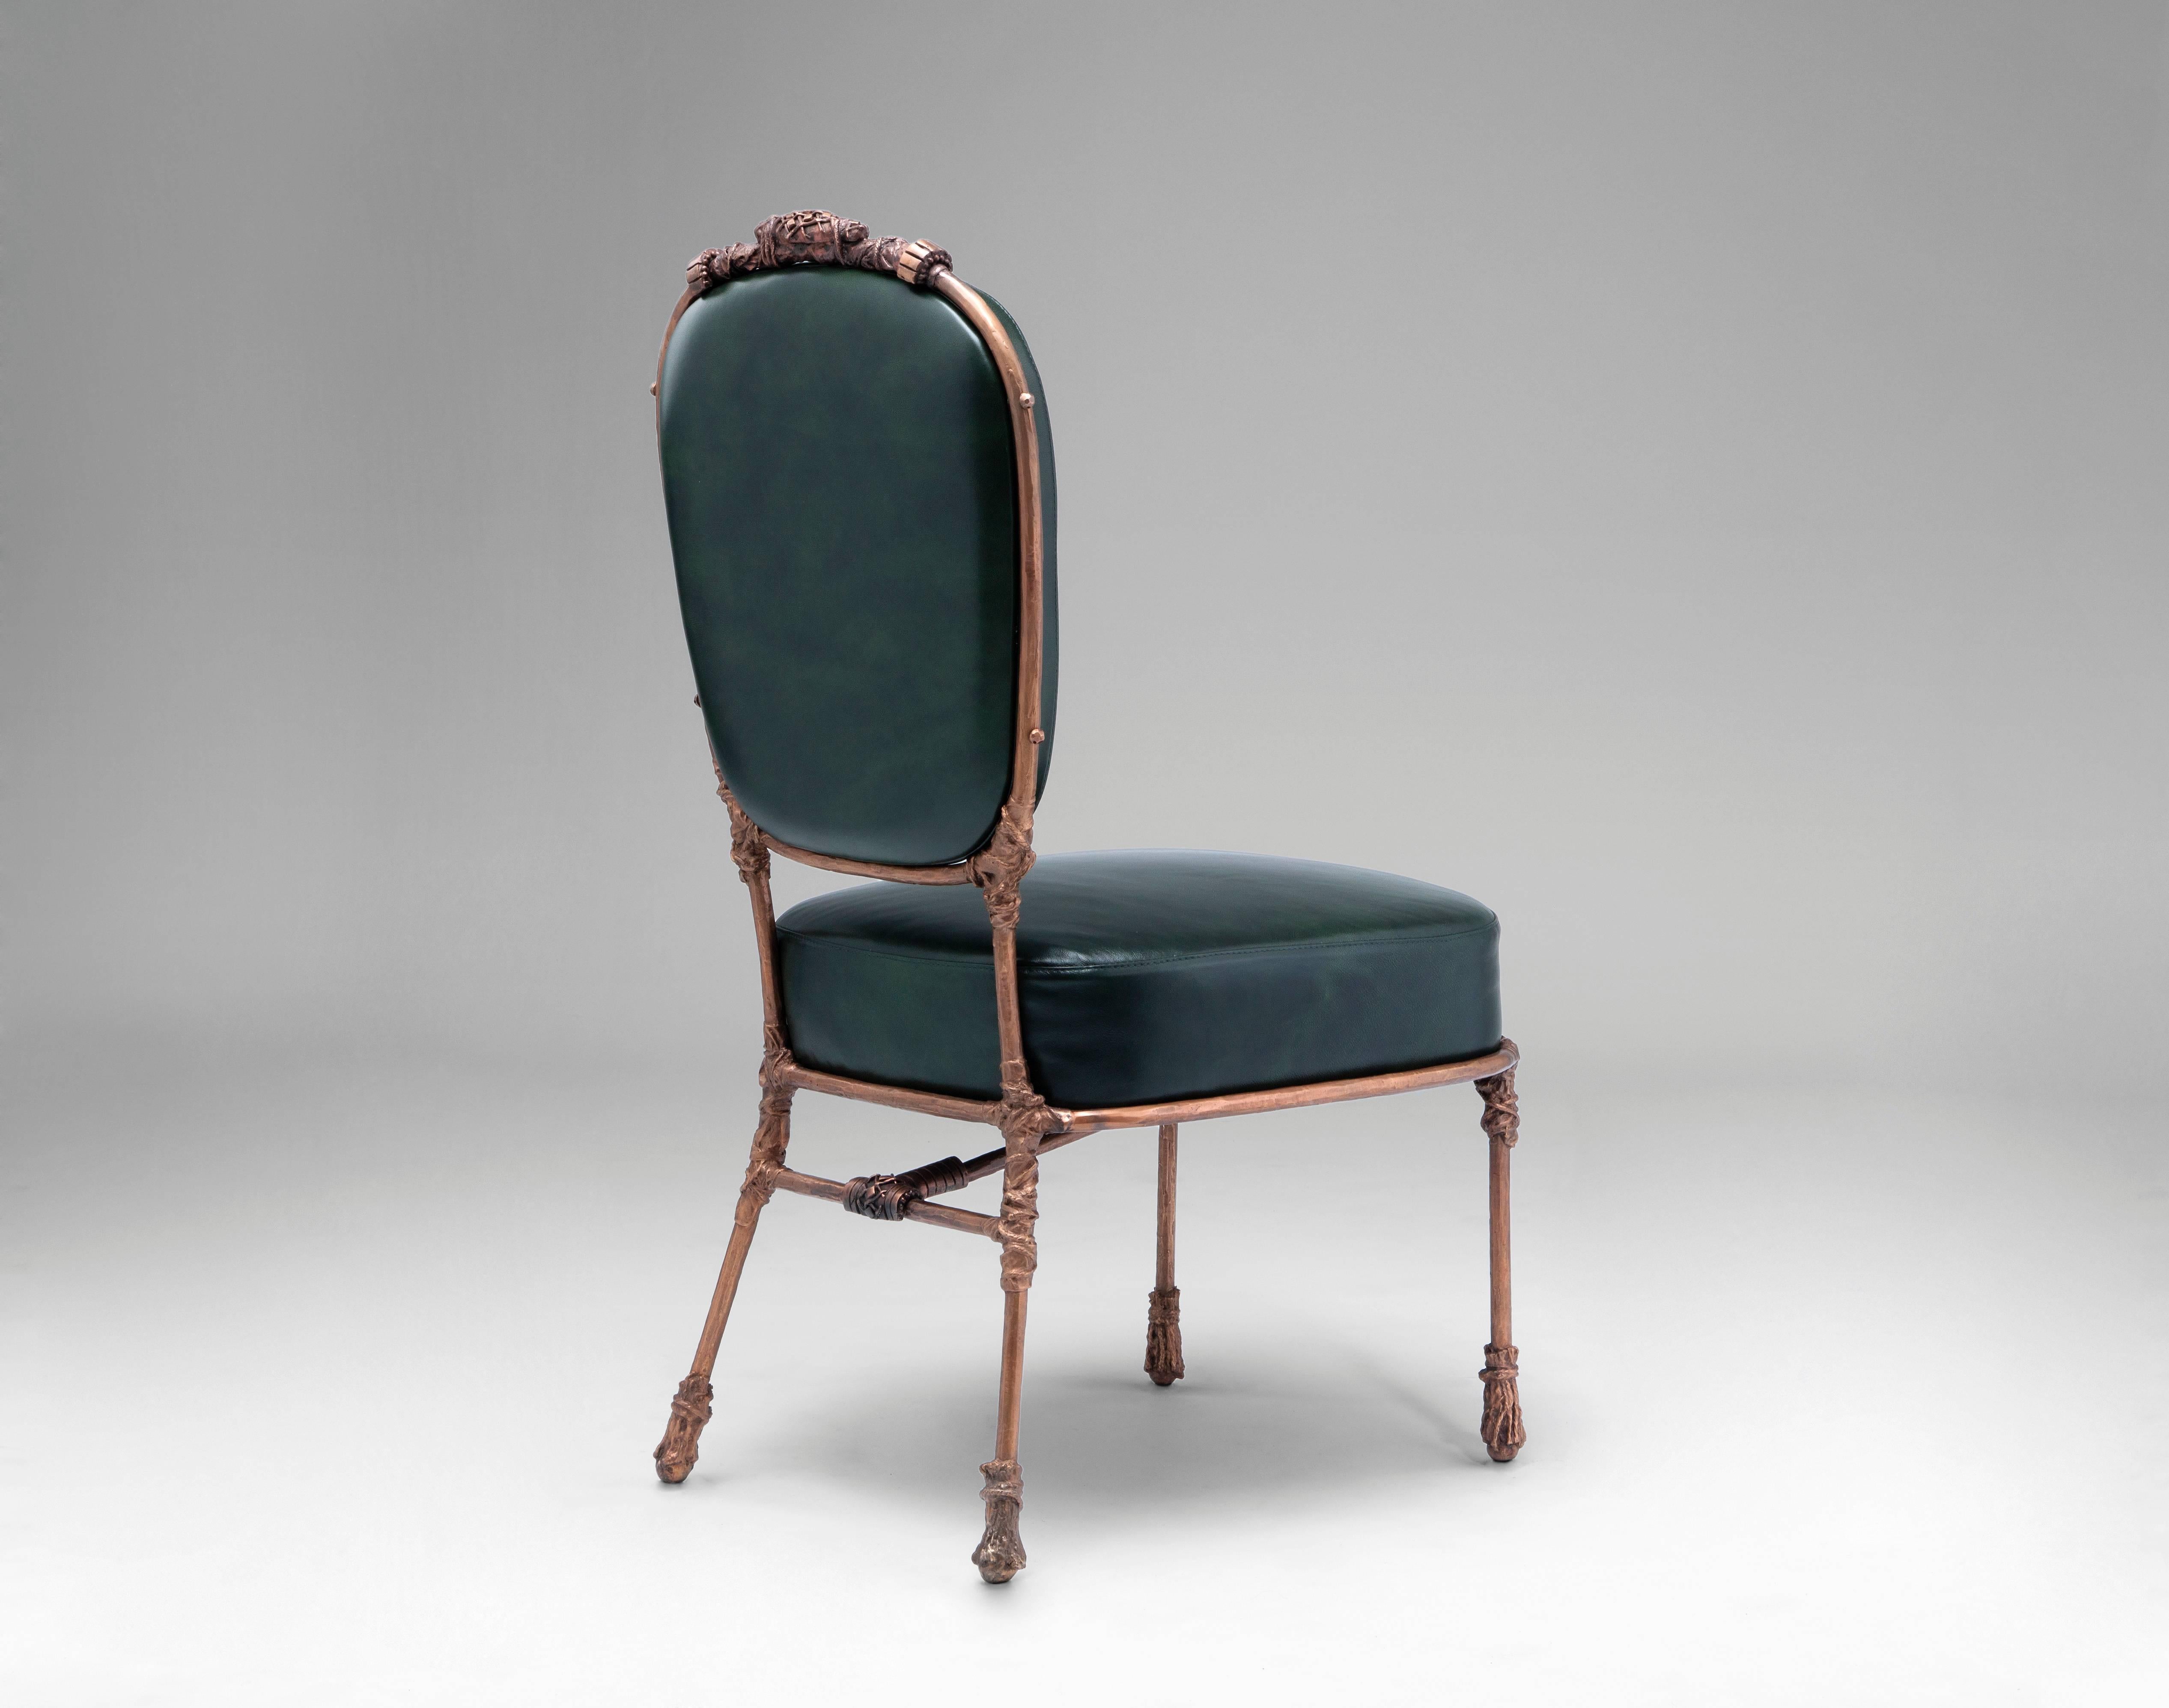 Mattia Bonetti
Chair 'Congo' 
2014 
Bronze, upholstery
H95 x L58 x D44 cm / H37.4 x L22.8 x D17.3 in
David Gill Gallery 
For EU buyers this piece is subject to a 20% VAT tax, which will be added to the price after the order has confirmed.  Please